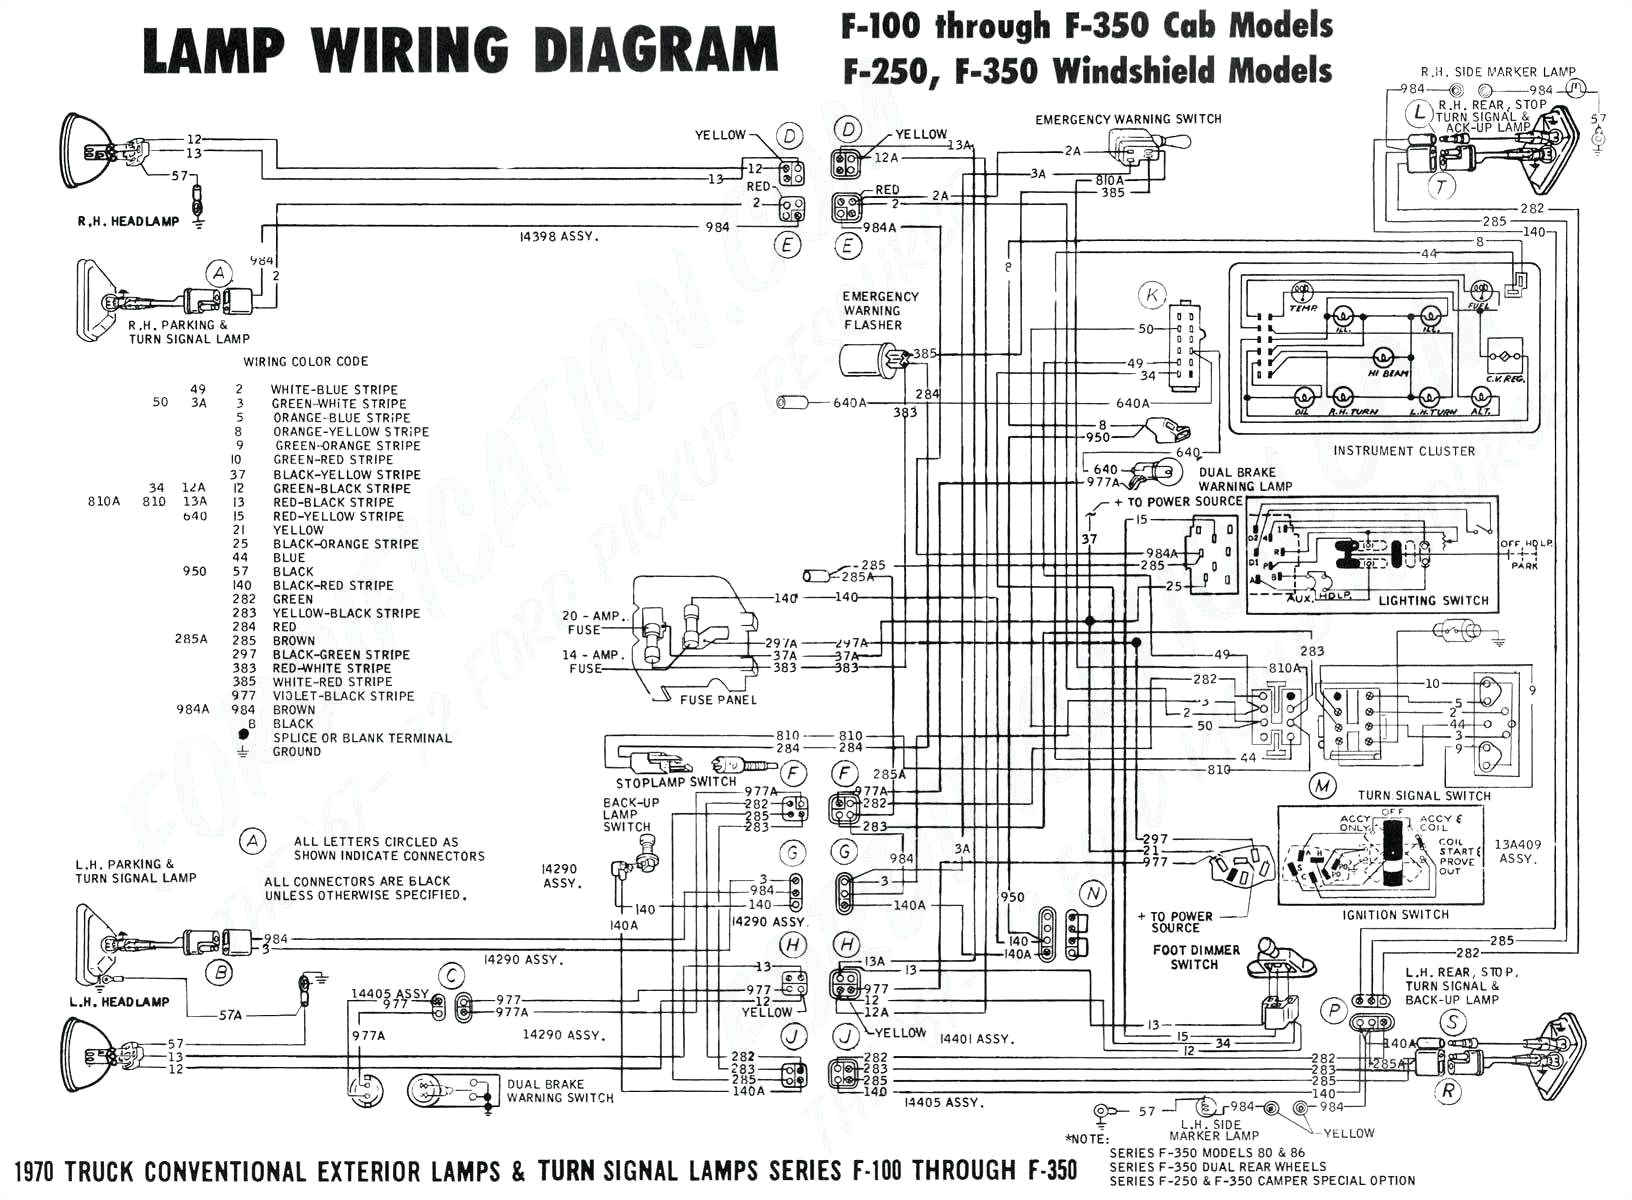 harness wiring diagram wiring diagram database ford f250 trailer wiring harness diagram